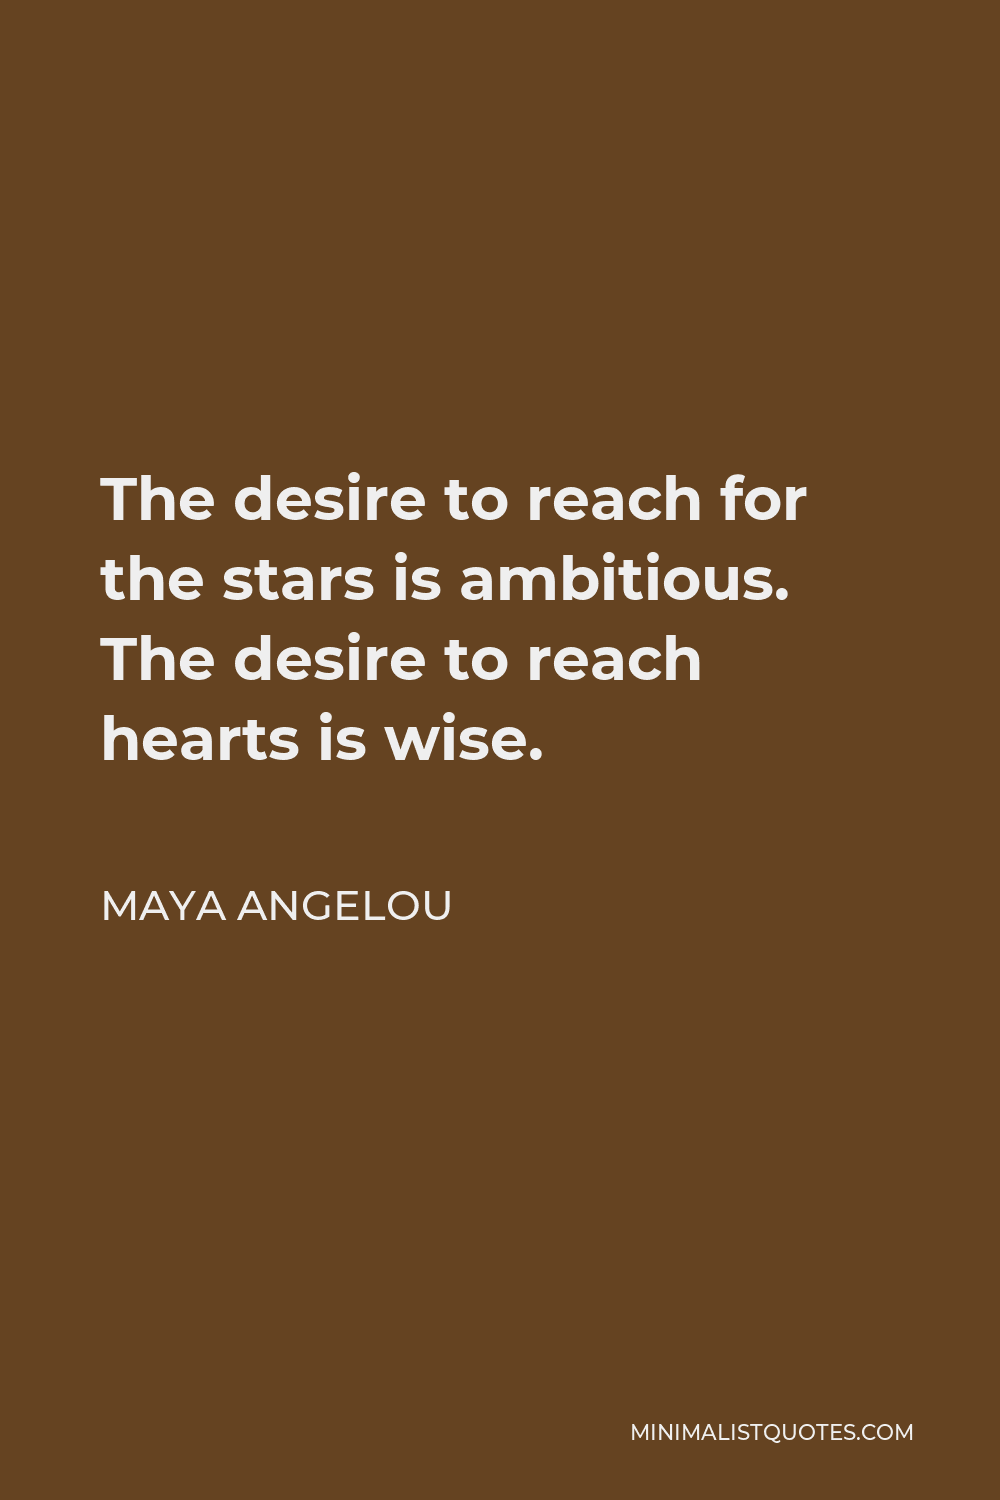 Maya Angelou Quote: The desire to reach for the stars is ambitious. The ...